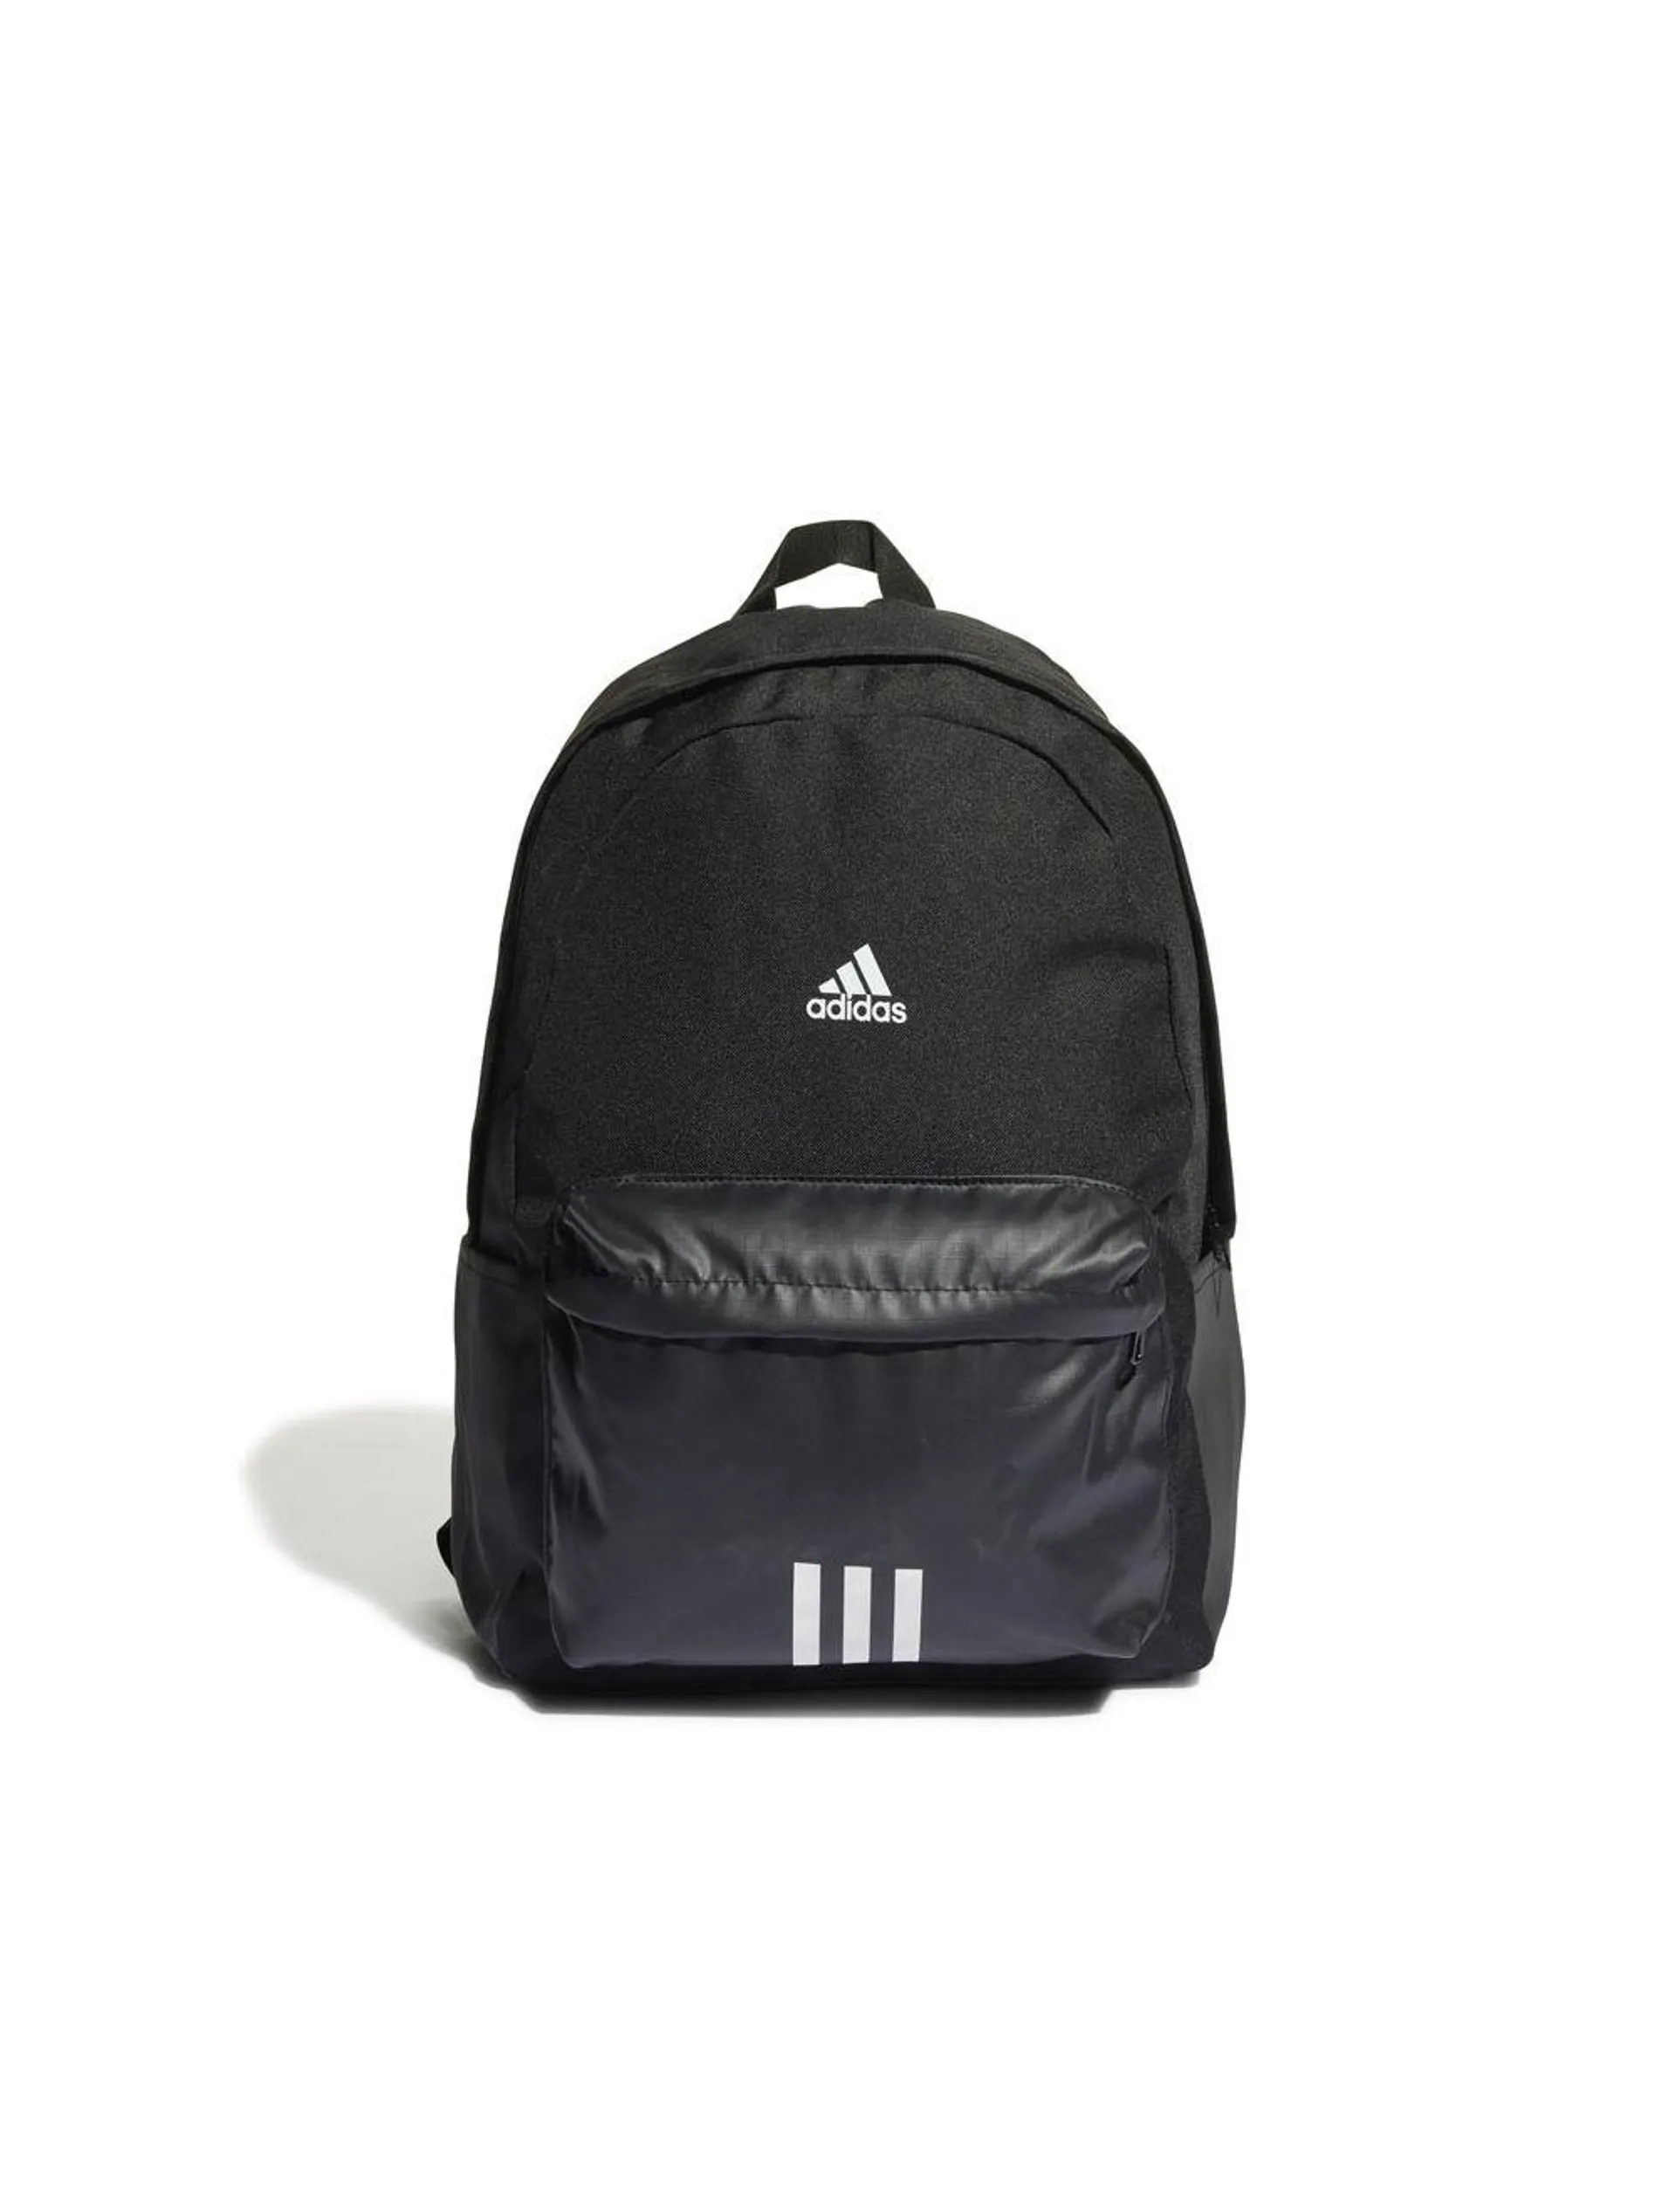 adidas Performance Classic Badge of Sport 3-Stripes. Backpack Black White